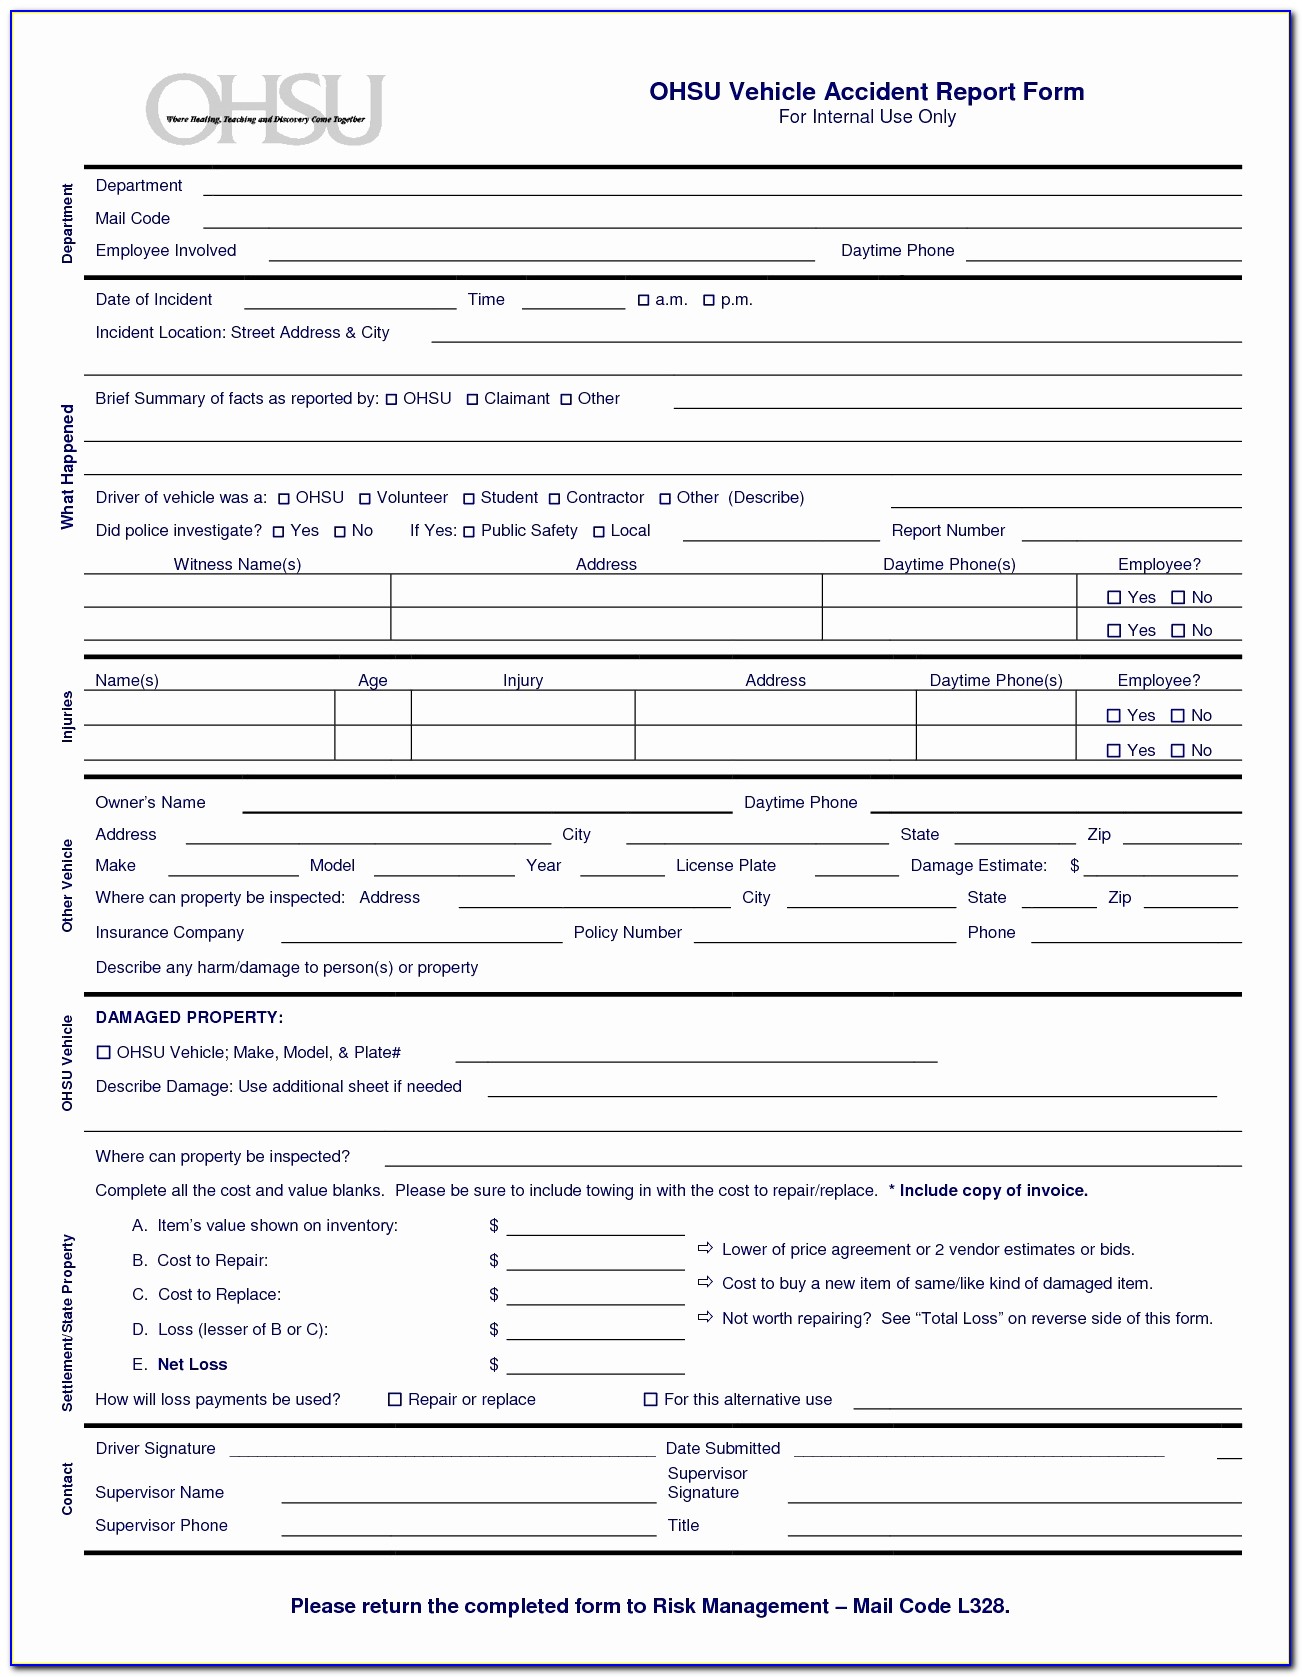 Homeowners Insurance Quote Form Template - Form : Resume Examples #